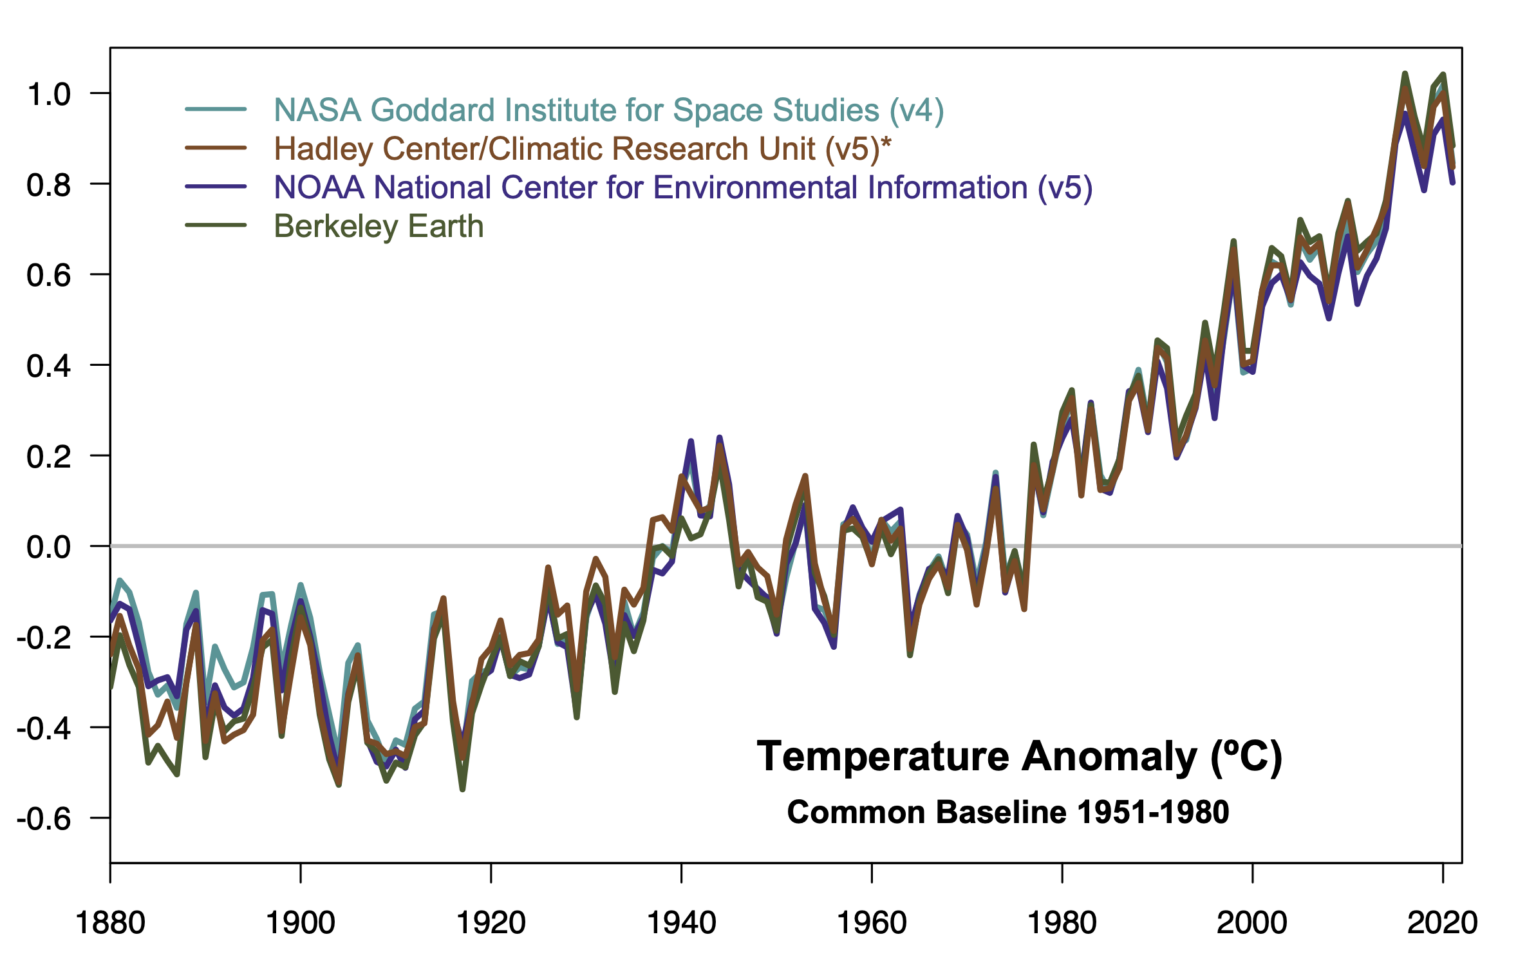 Temperature data has been warming rapidly over the past few decades, with the latest data going up to 2021.